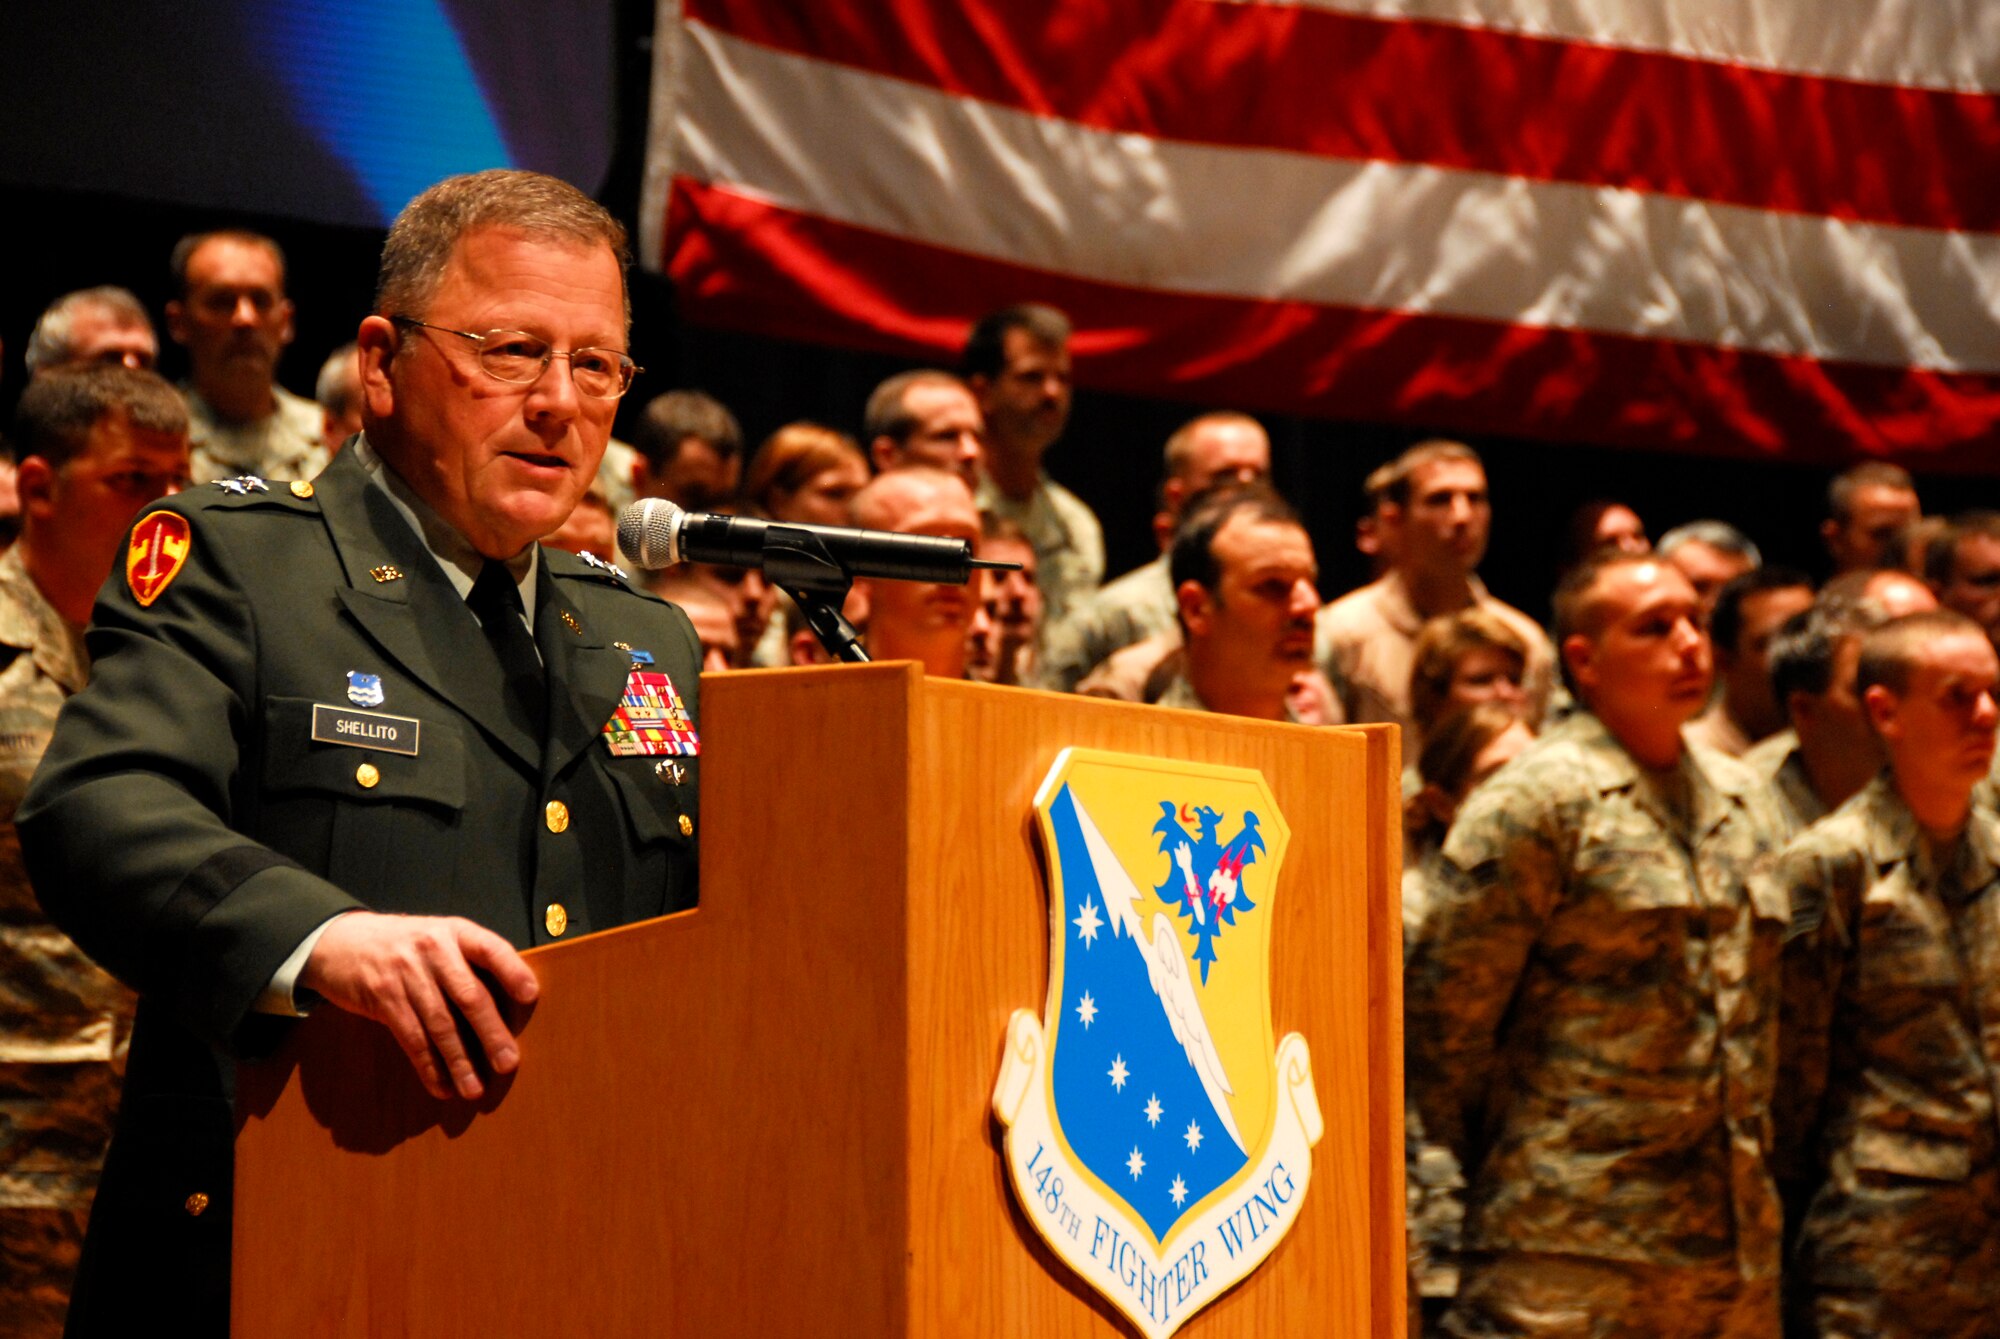 U.S. Army Maj. Gen. Larry Shellito, Adjutant General of the Minnesota National Guard, speaks during a deployment ceremony for the 148th Fighter Wing based in Duluth, Minn. at the Duluth Entertainment and Convention Center Nov. 2, 2008.  Approximately 300 148th Fighter Wing members will deploy overseas in support of Operation Iraqi Freedom and/or Operation Enduring Freedom between Sept 2008 and Jan 2009. (U.S. Air Force photo by SSgt Donald L. Acton) (Released)